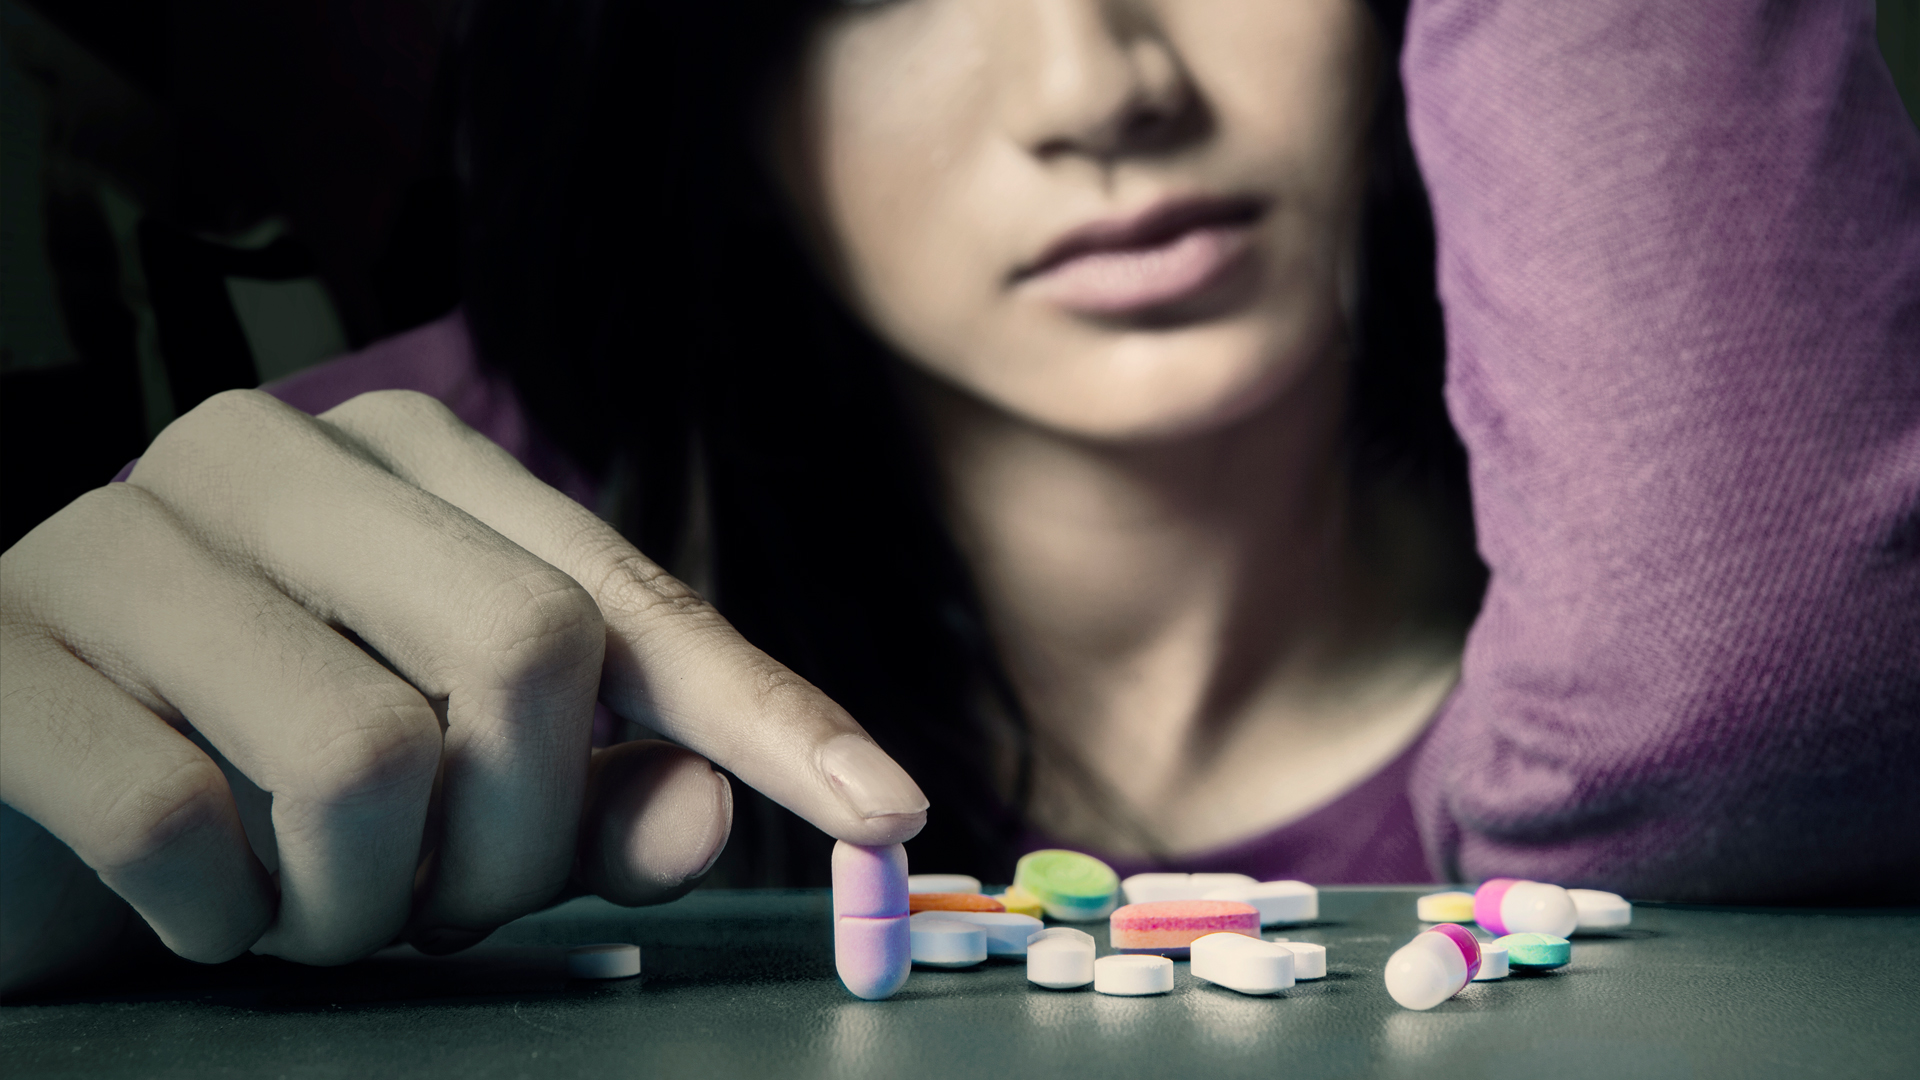 Symptoms And Signs of Opiate Addiction